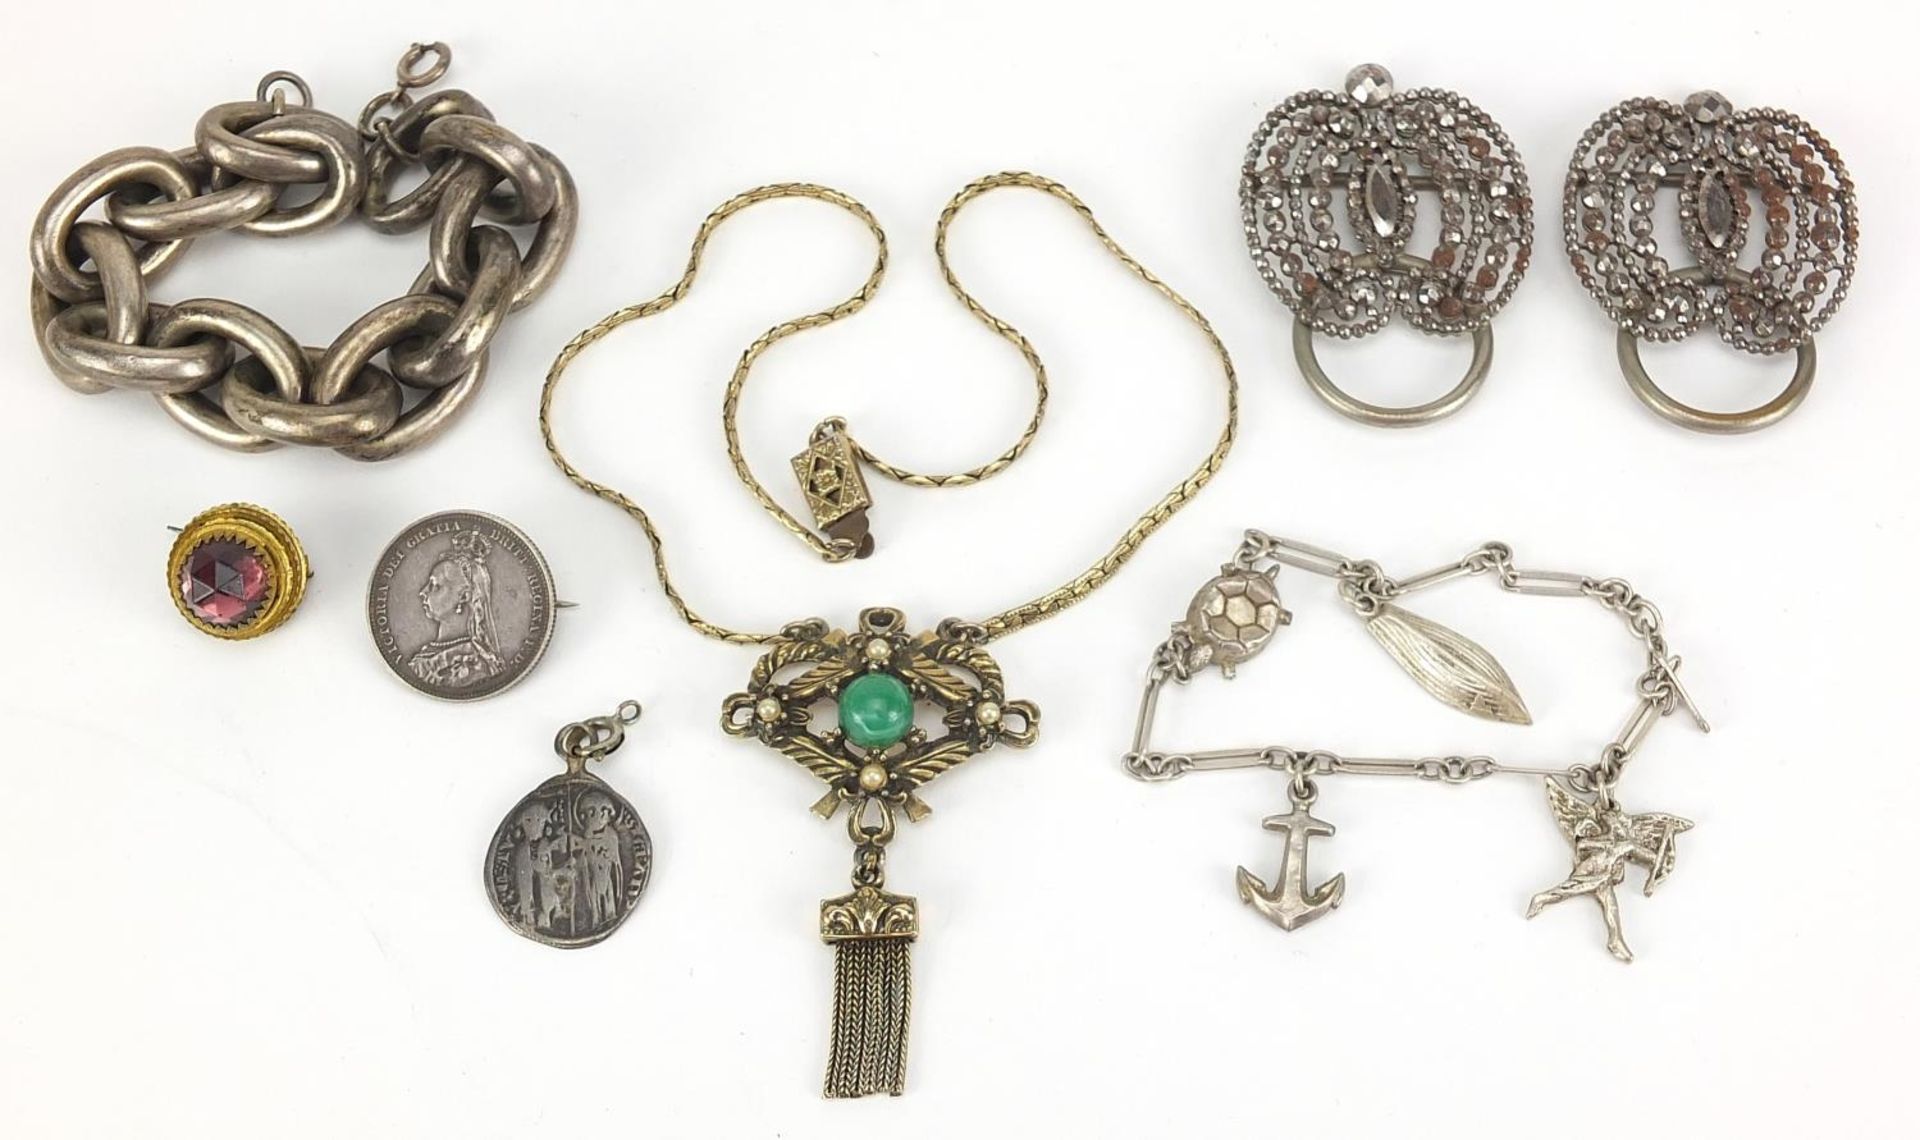 Antique and later jewellery including cut steel, silver charm bracelet, 1887 coin brooch and a large